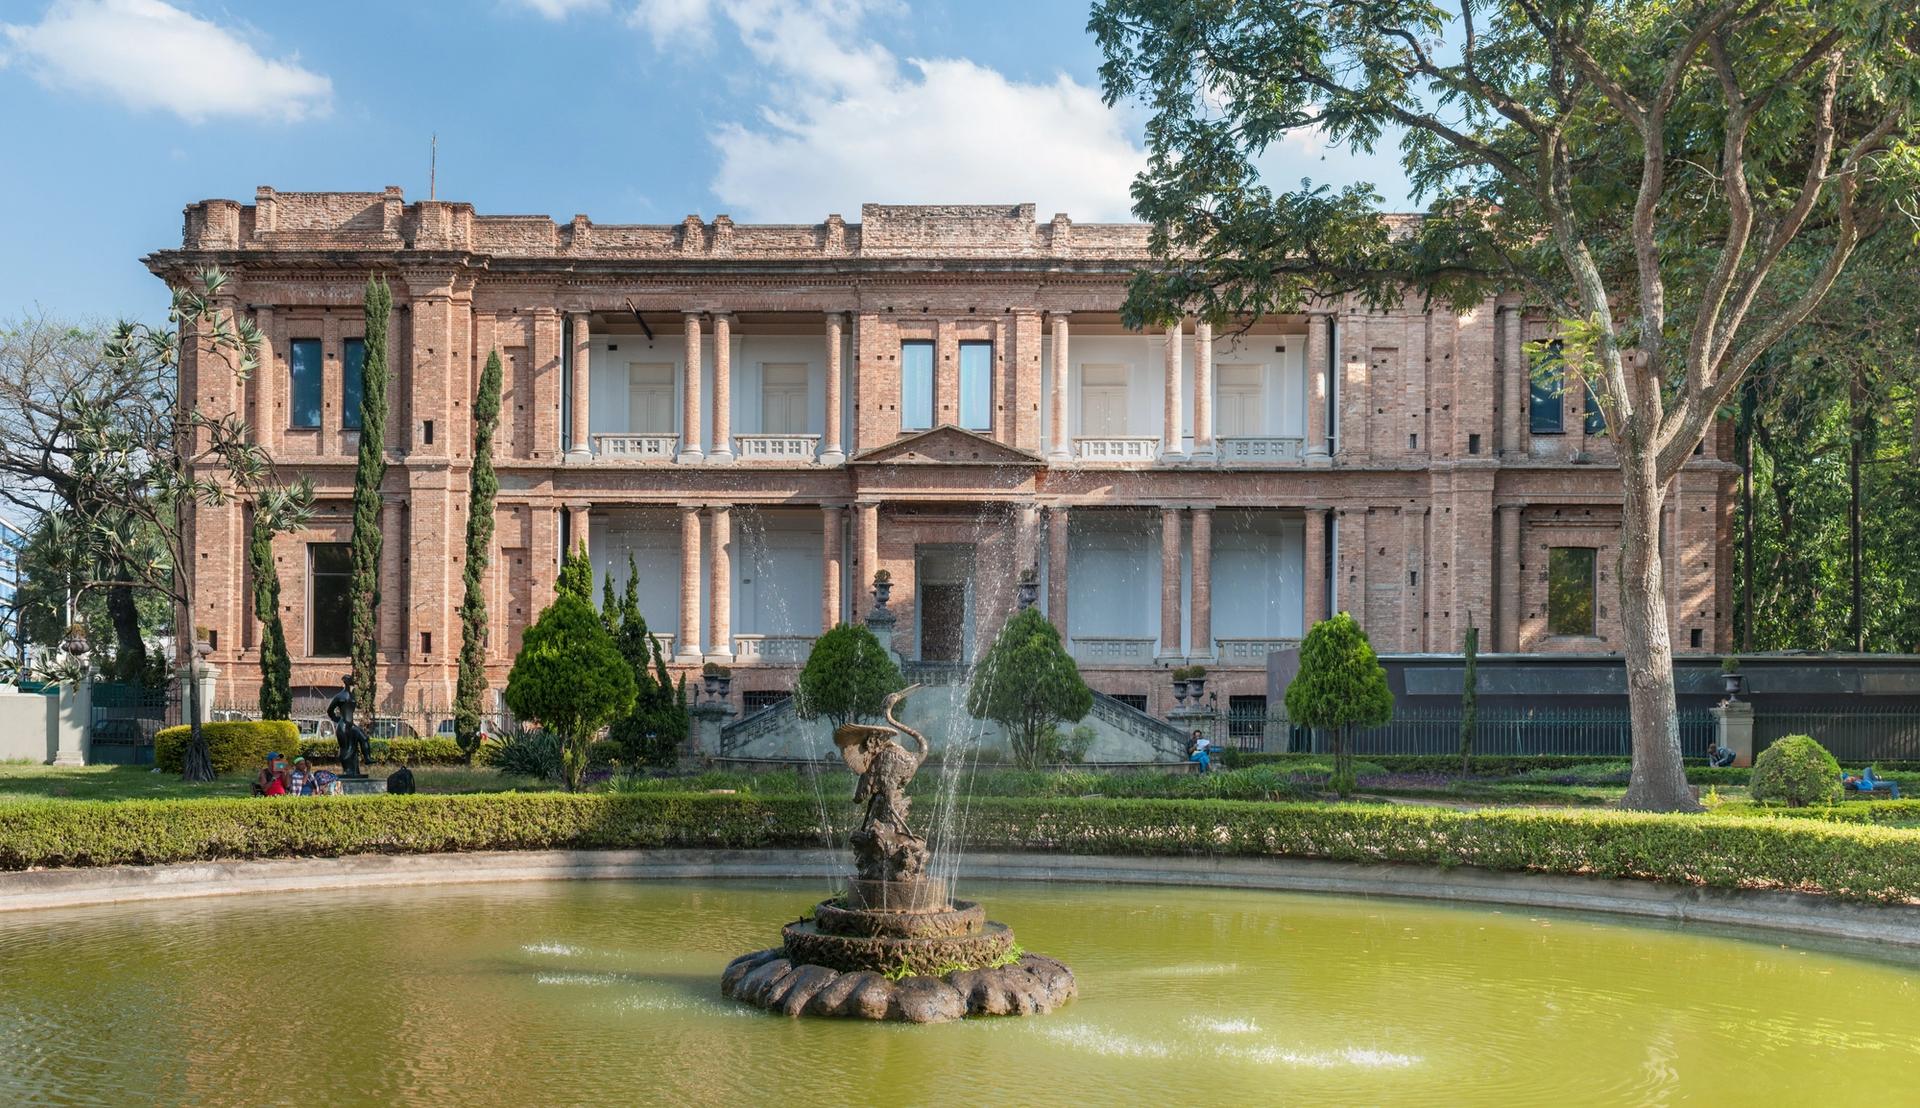 São Paulo's Pinacoteca, one of the most comprehensive museums in South America, expects the cut to drastically reduce public programmes and force the cancellation of some temporary exhibitions, lectures and free admission on Saturdays, which benefit more than 150,000 visitors annually Photo: Wilfredo Rodríguez